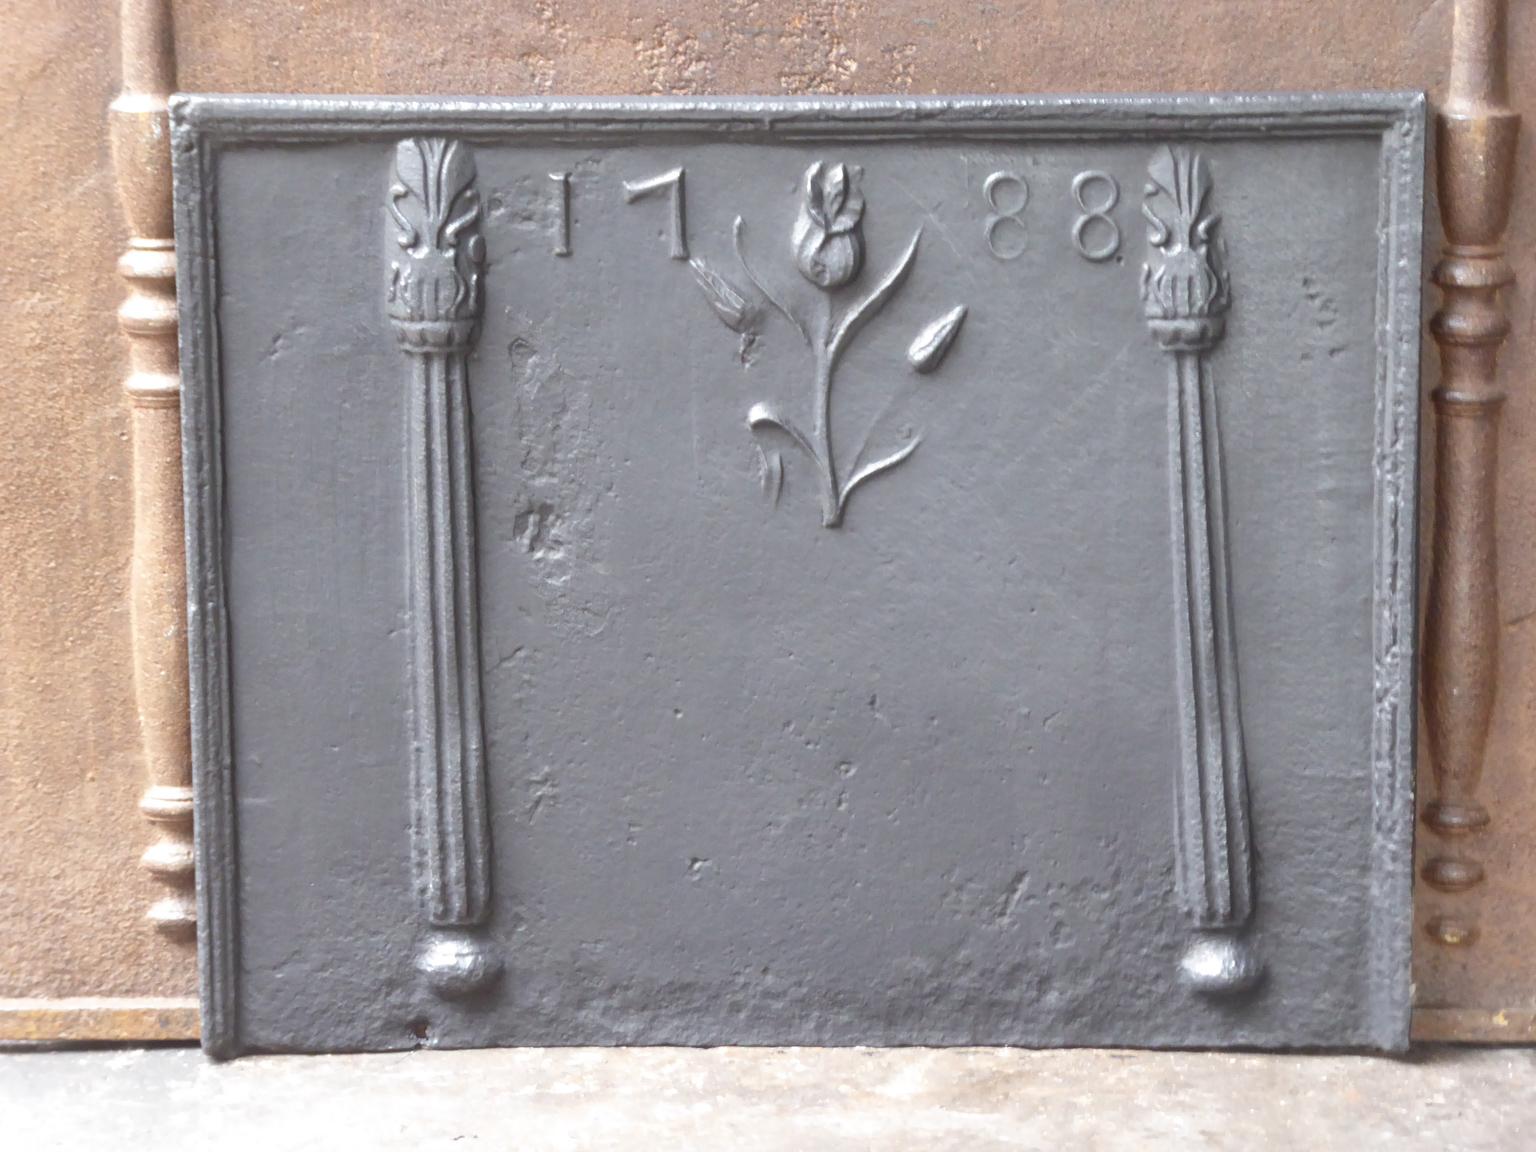 French neoclassical fireback with two decorated pillars, a flower and the date of production 1788.

The fireback is made of cast iron and has a black / pewter patina. It is in a good condition and does not have cracks.